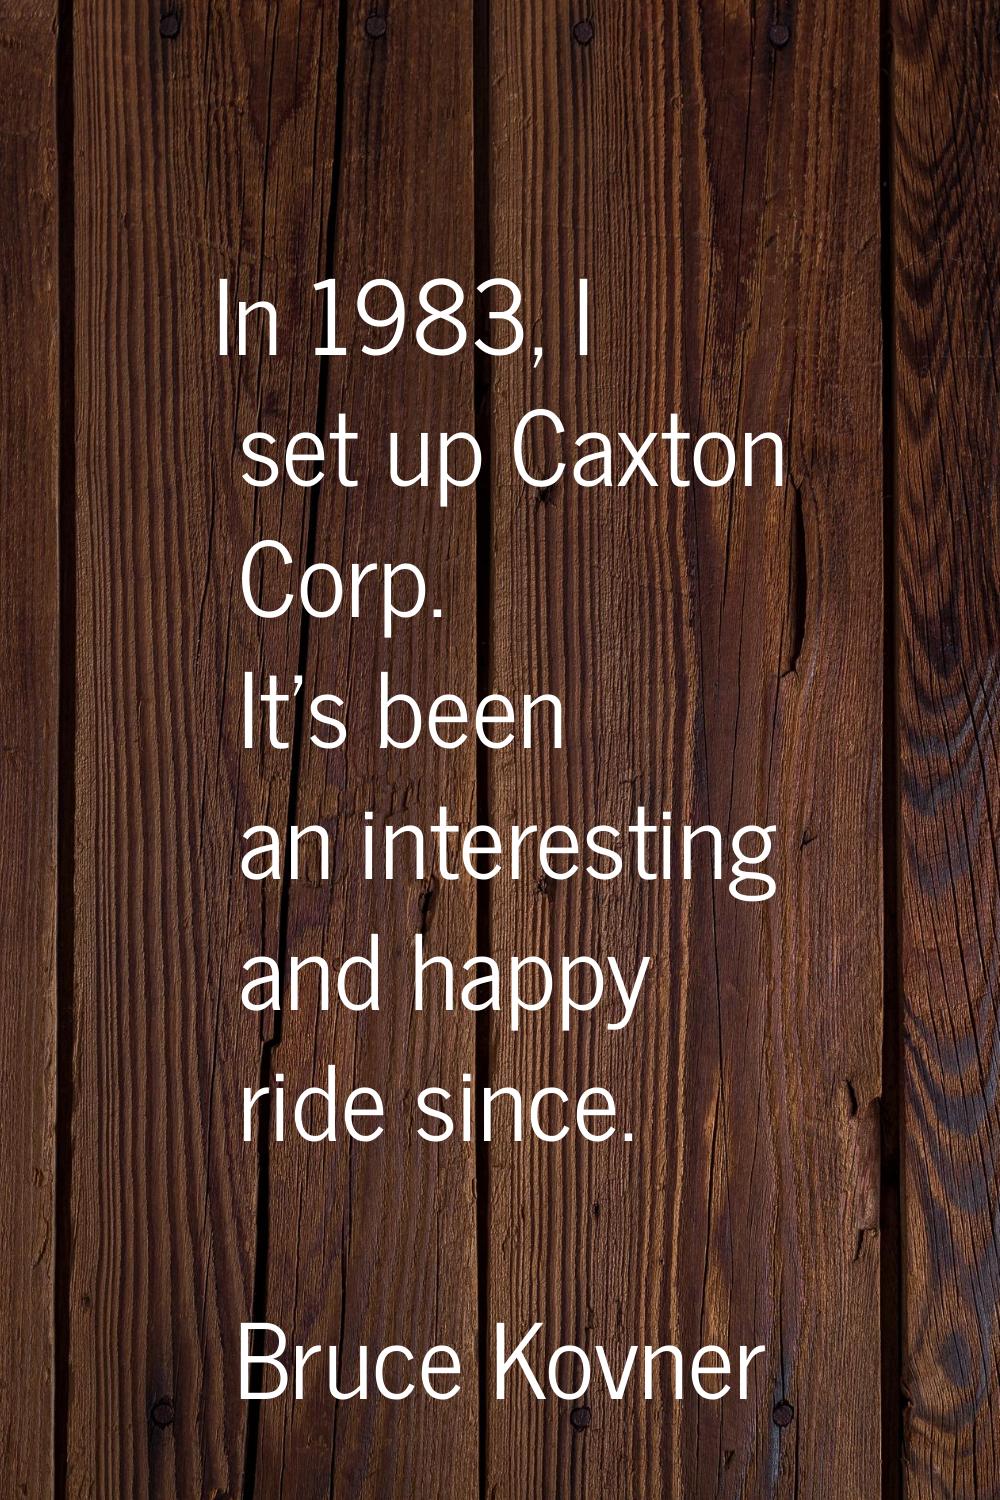 In 1983, I set up Caxton Corp. It's been an interesting and happy ride since.